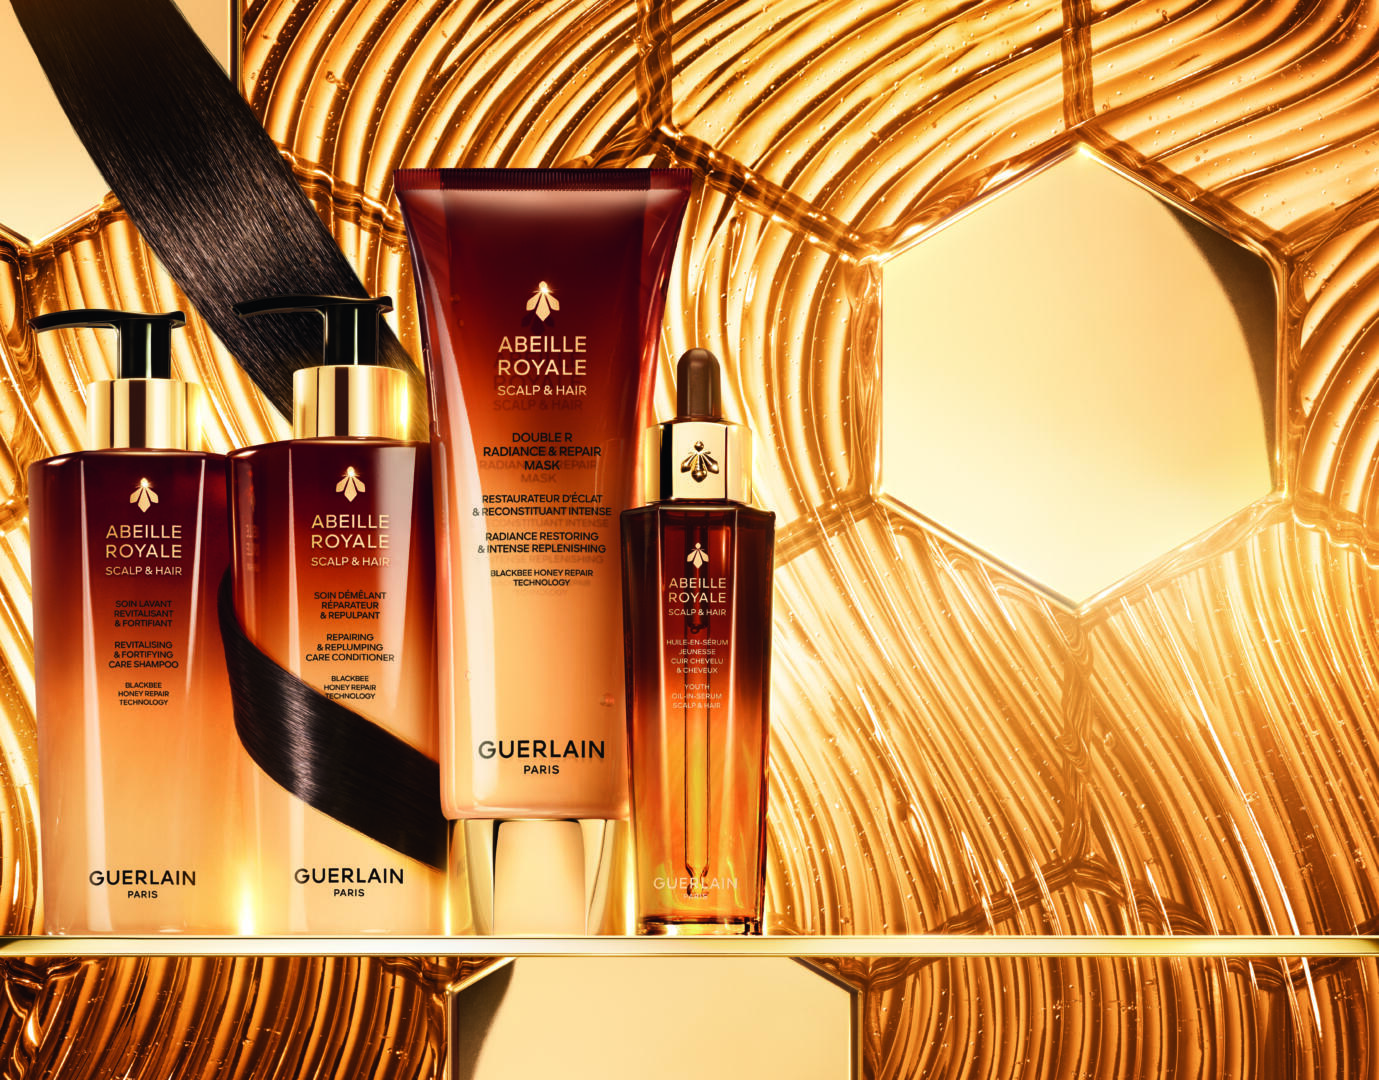 Guerlain revolutionizes hair care with the Abeille Royale Scalp & Hair Care Collection